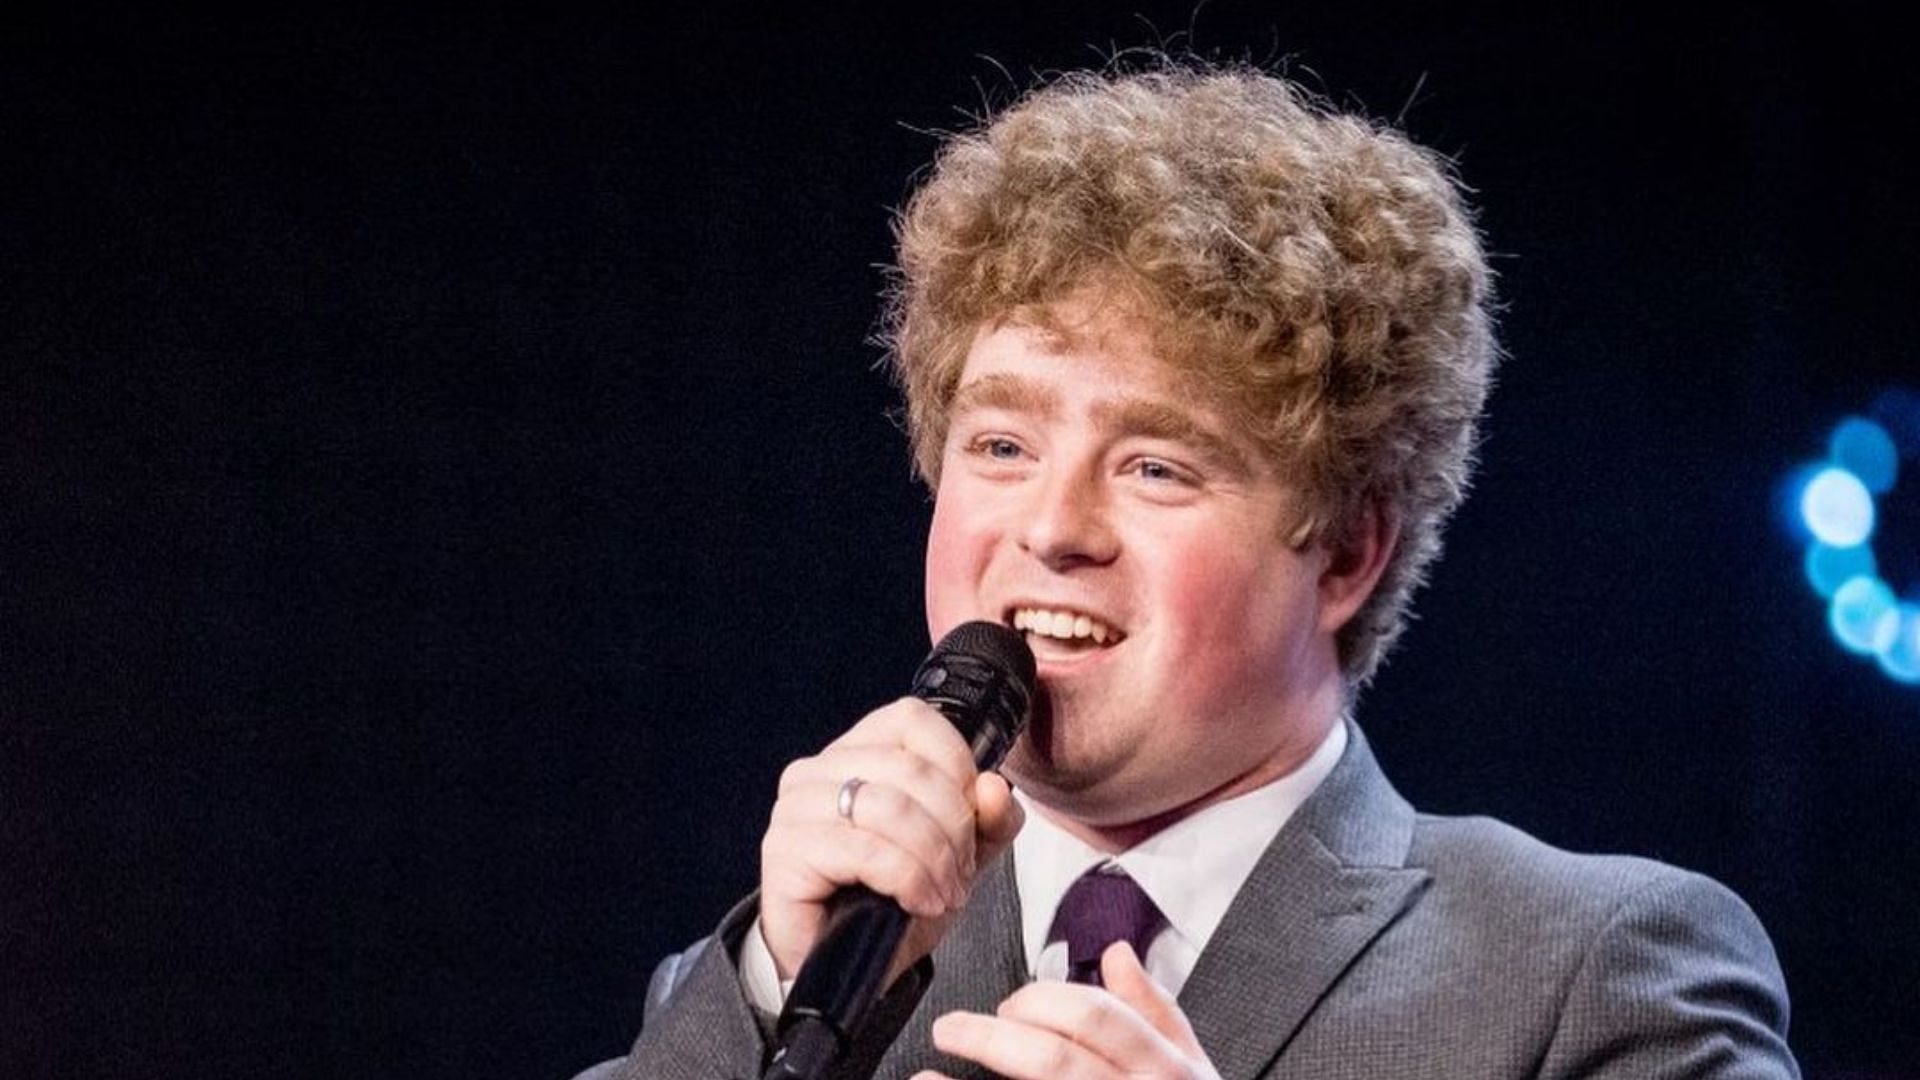 Who is Britain's Got Talent finalist Tom Ball? Meet the singer ahead of